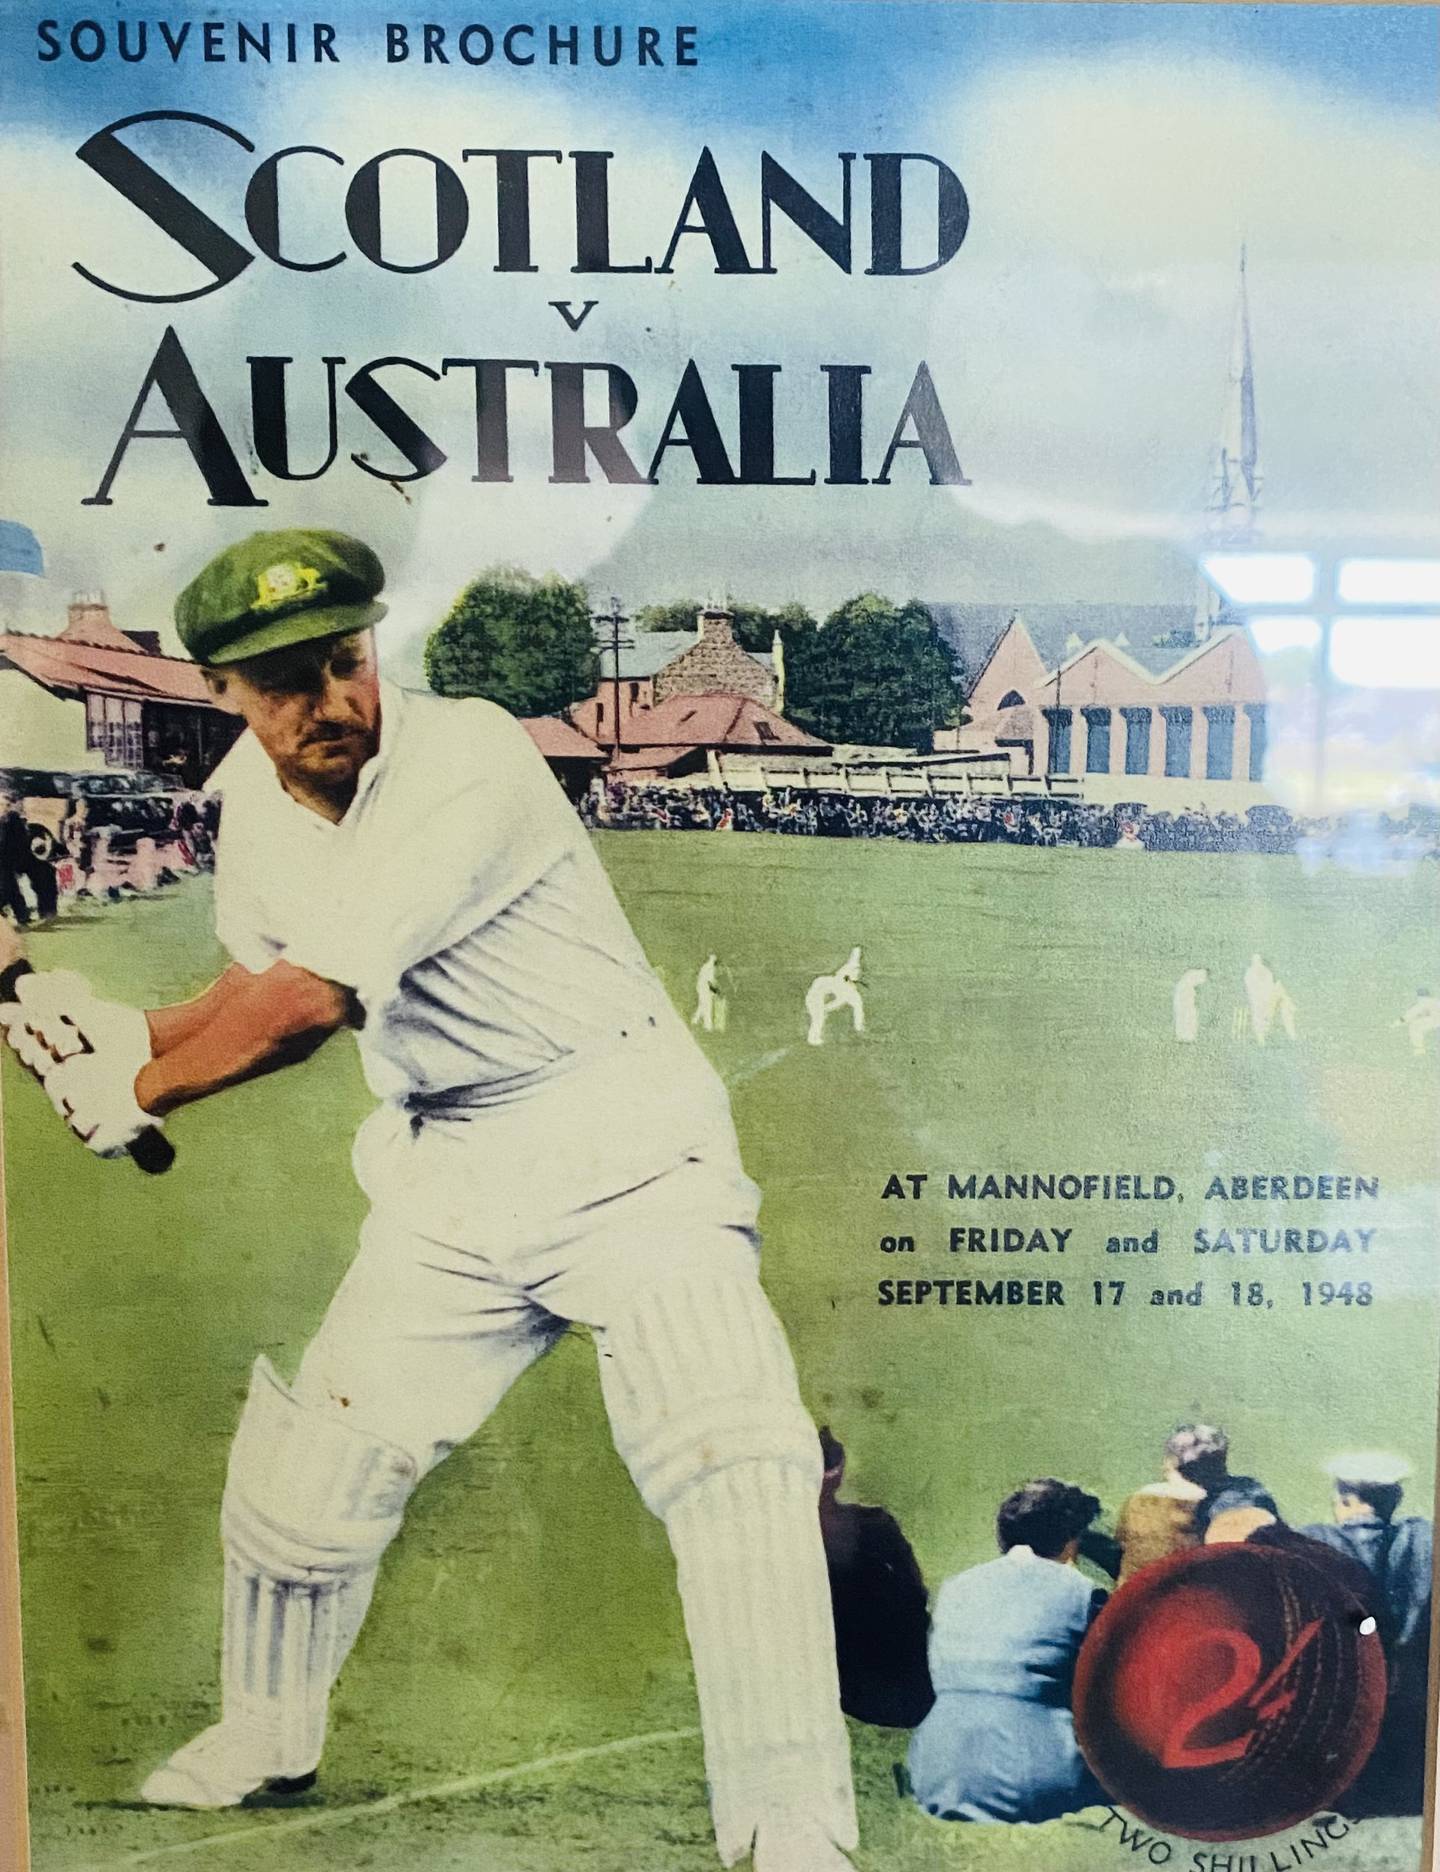 A front cover of the souvenir brochure of the visit of the 1948 Australians hangs in the Bradman Suite at Aberdeenshire Cricket Club.